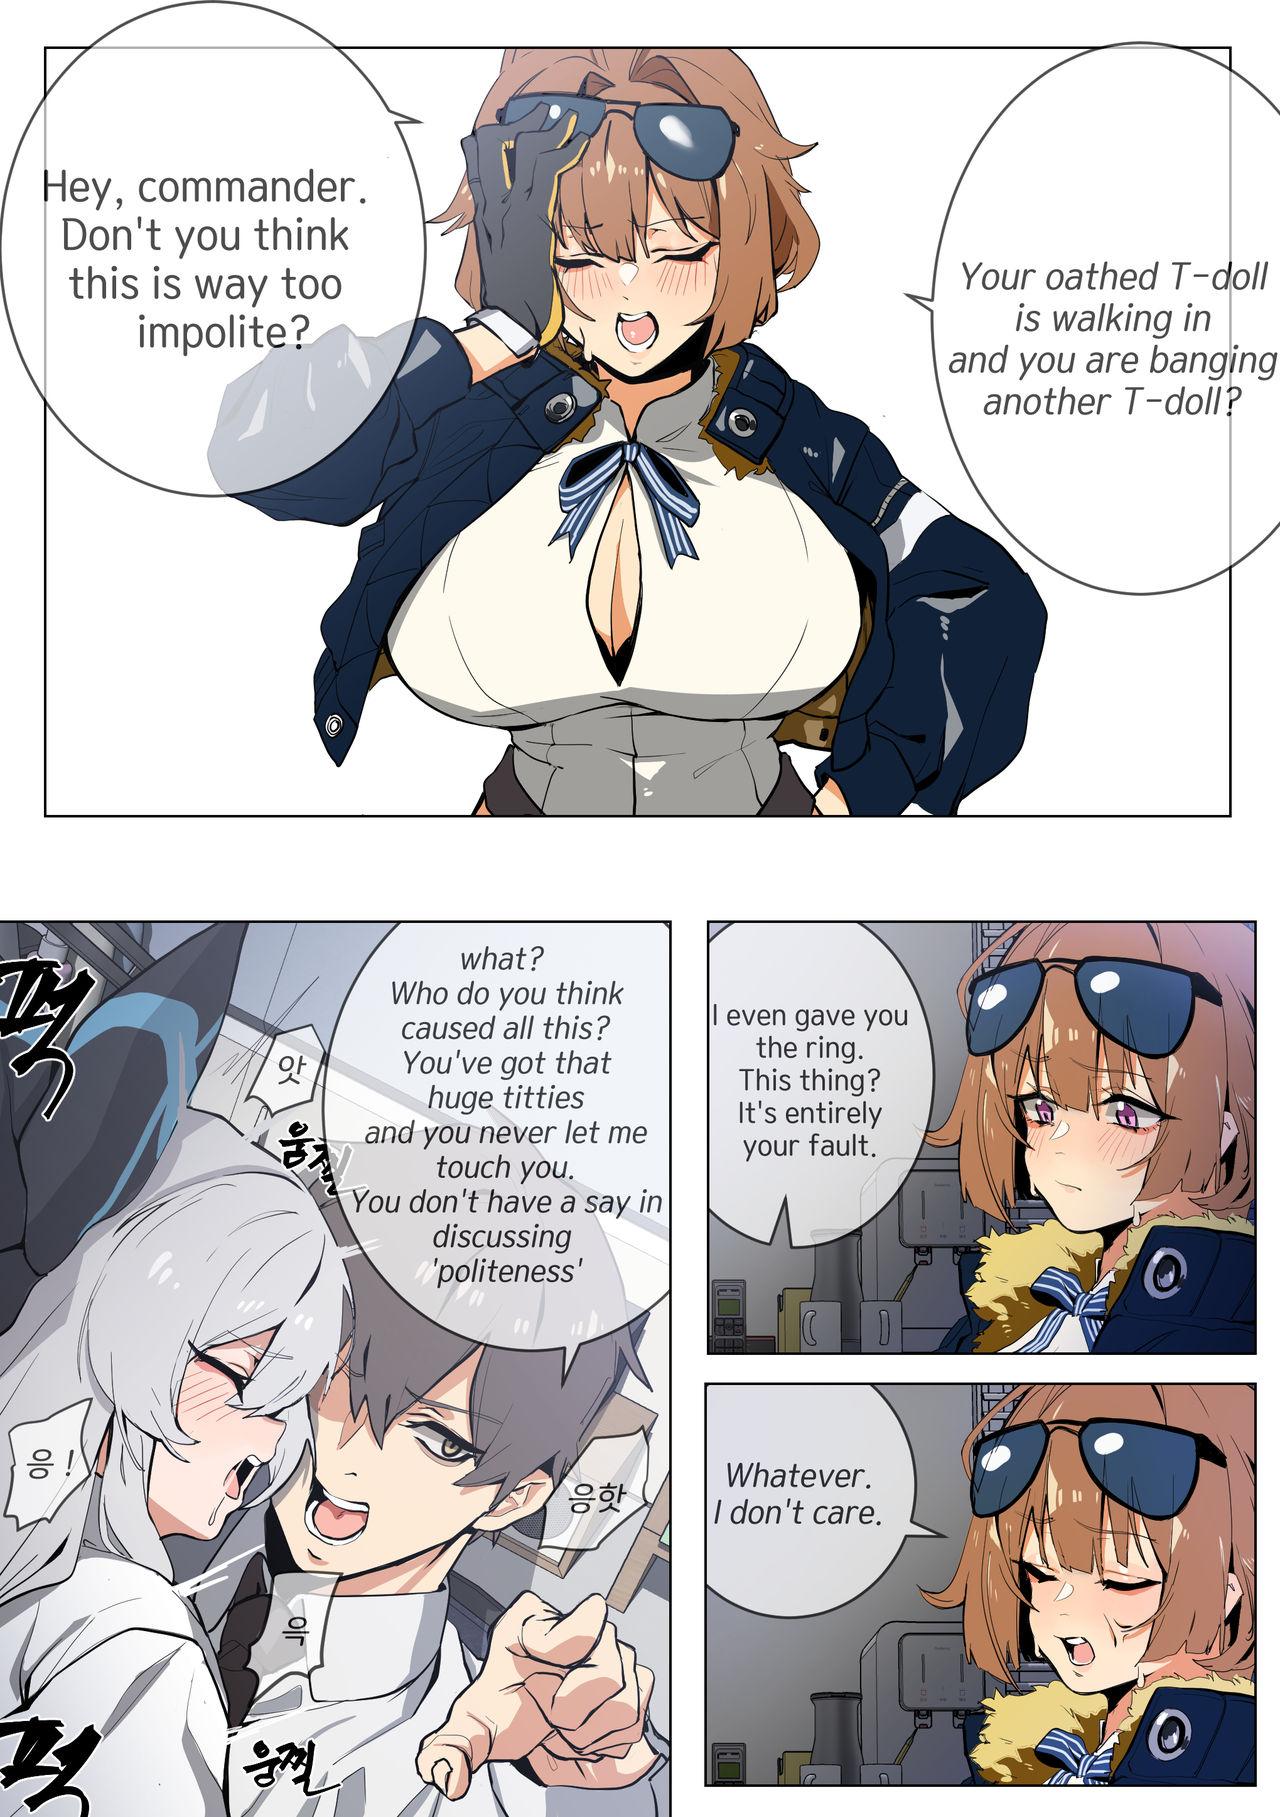 Shecock Grizzly - Girls frontline  - Page 3